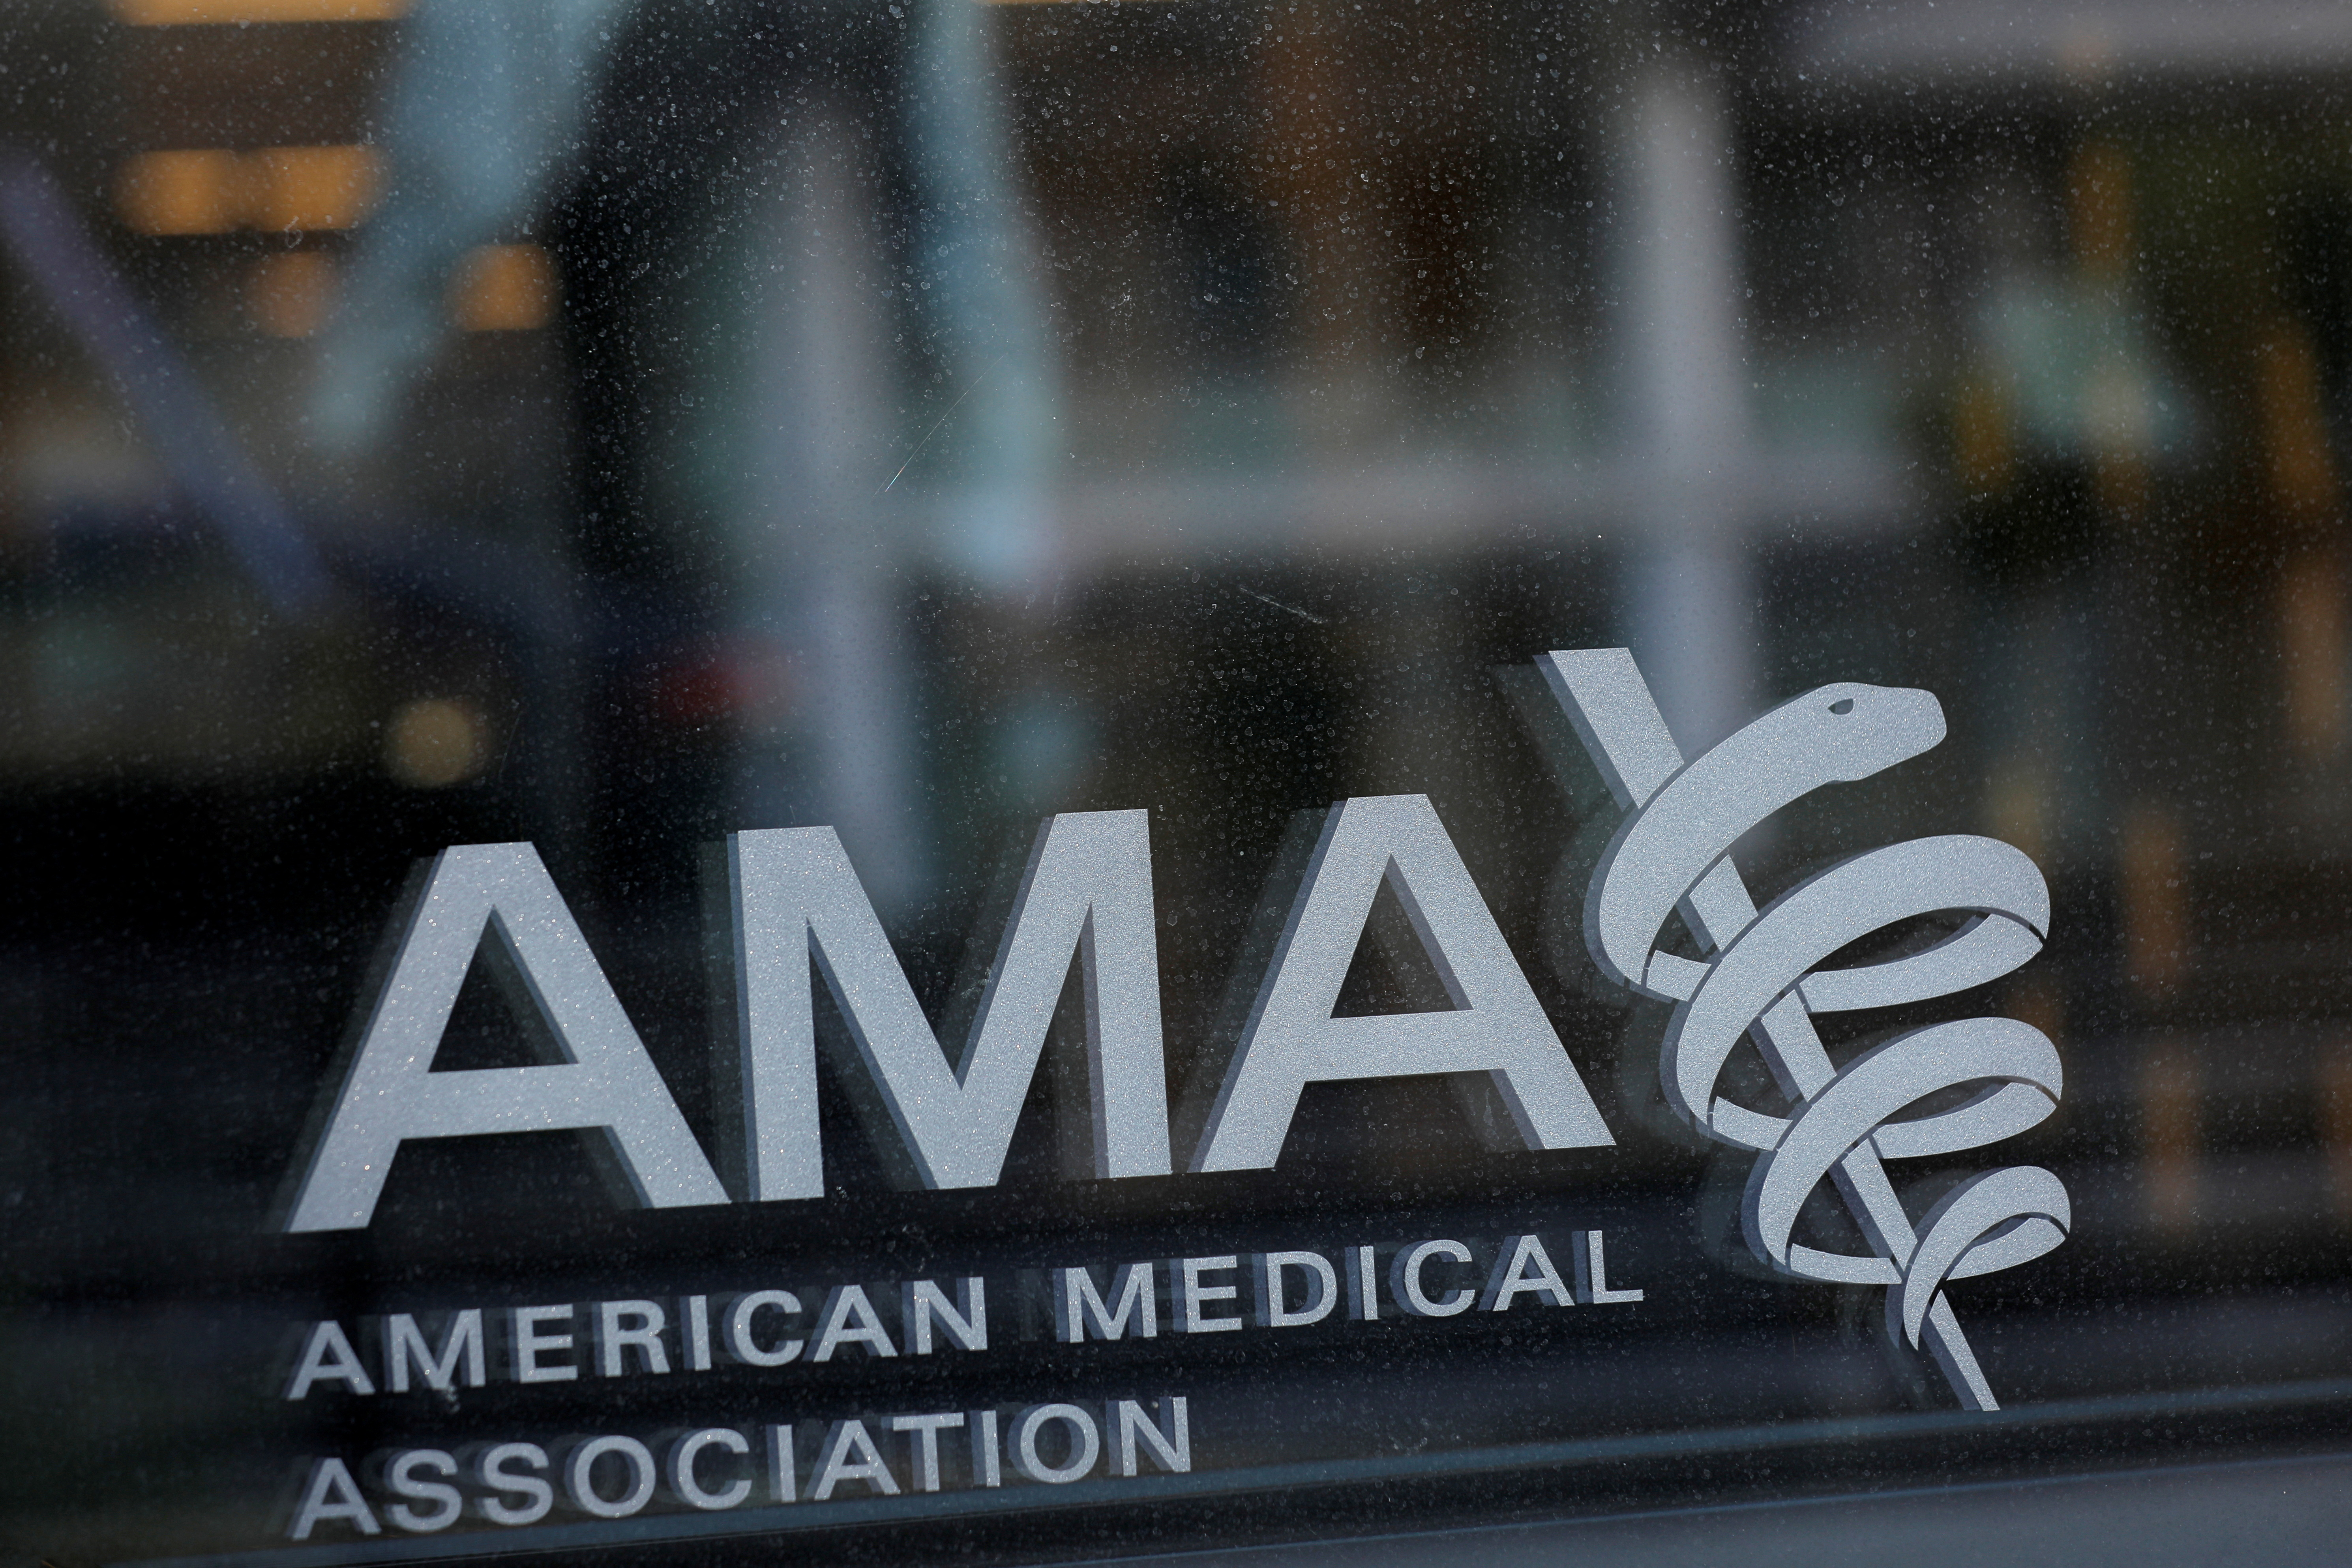 The American Medical Association logo is seen at their office in Washington, D.C.